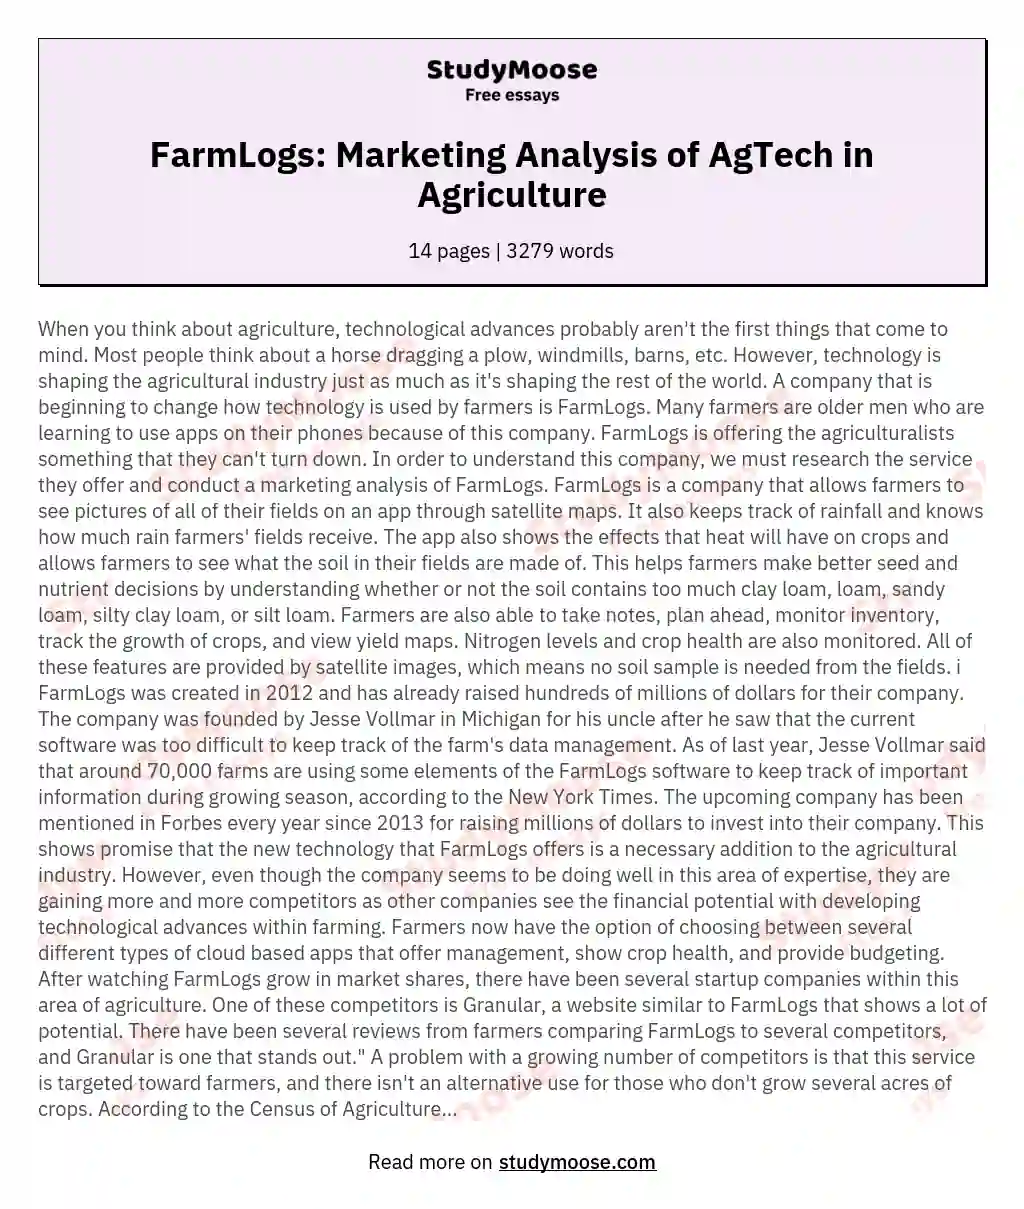 FarmLogs: Marketing Analysis of AgTech in Agriculture essay